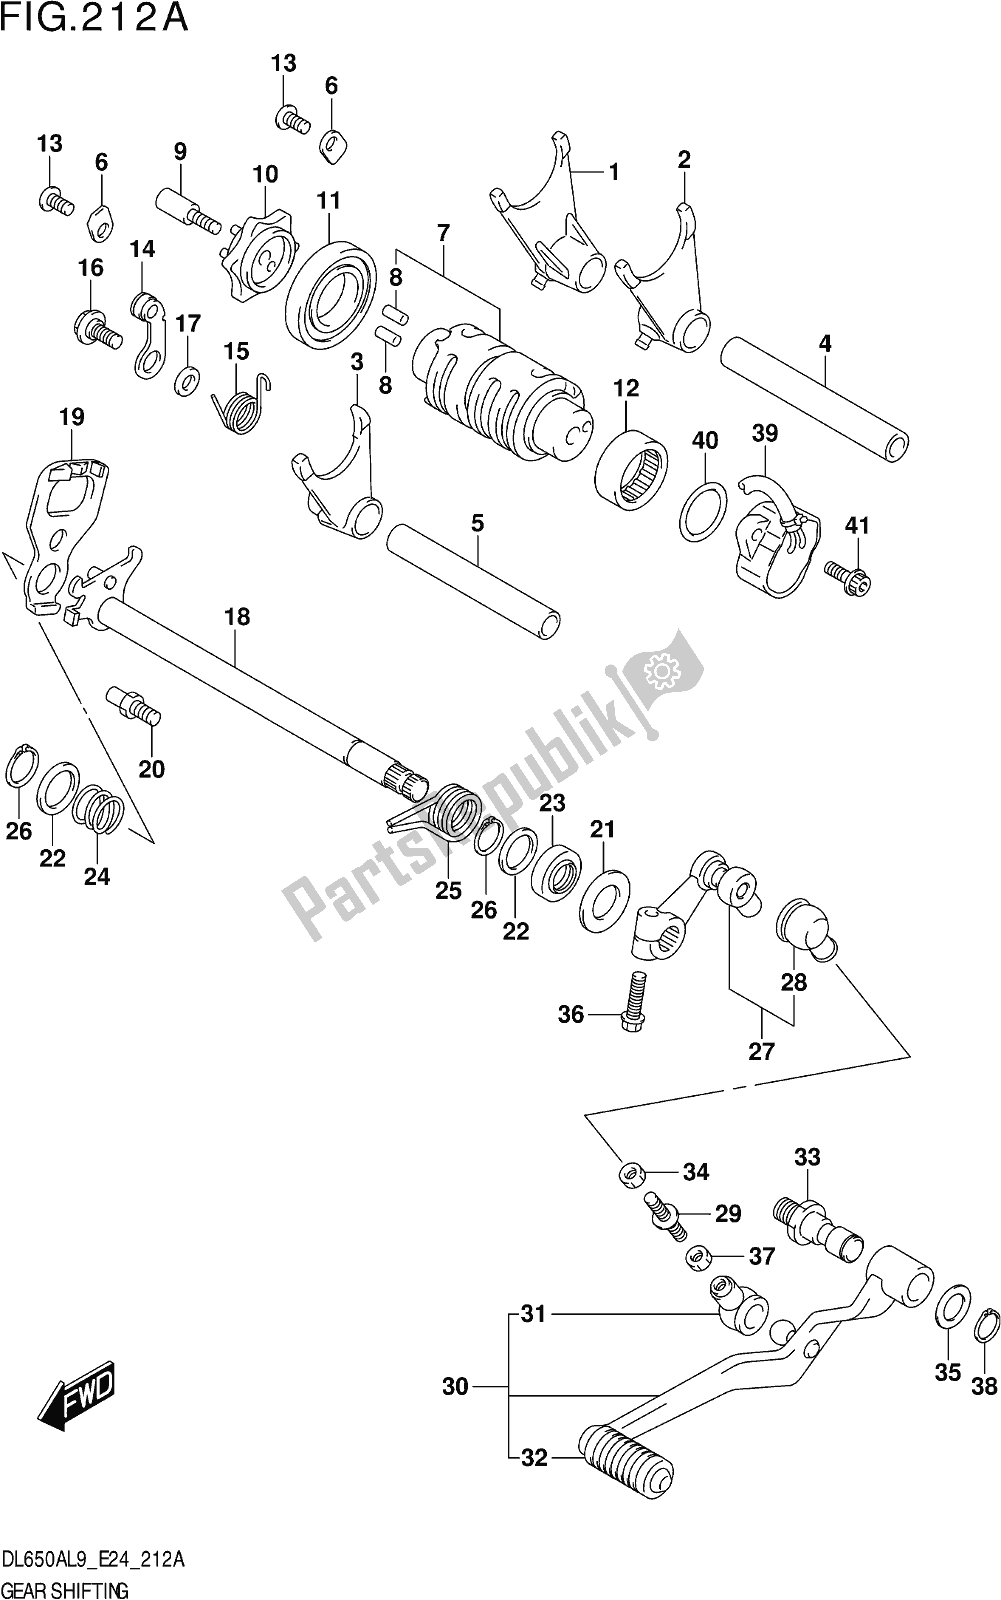 All parts for the Fig. 212a Gear Shifting of the Suzuki DL 650A V Strom 2019